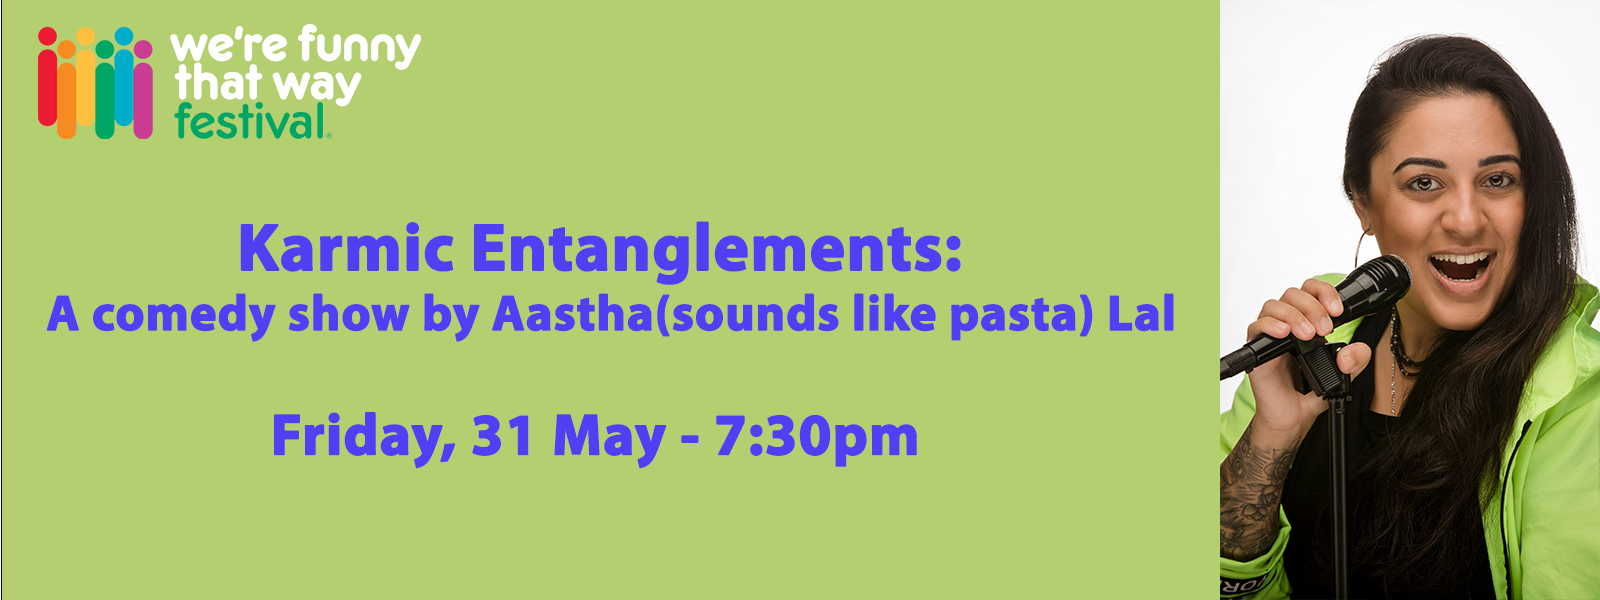 Karmic Entanglements: A Comedy Show by Aastha (sounds like pasta) Lal  show poster